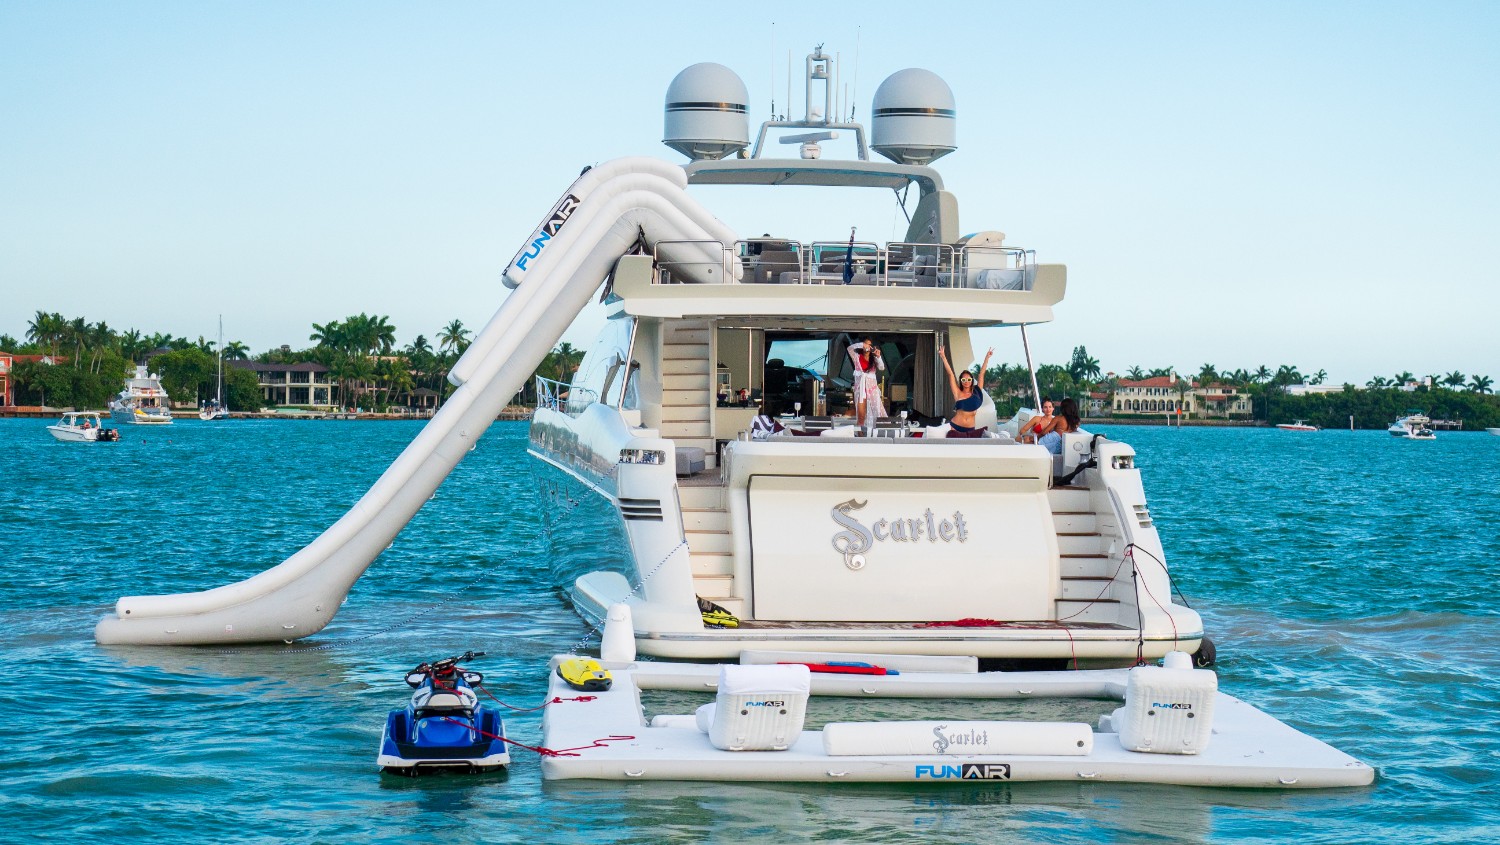 Scarlet-2-Azimut-Yacht-For-Charter-Miami-Toys2